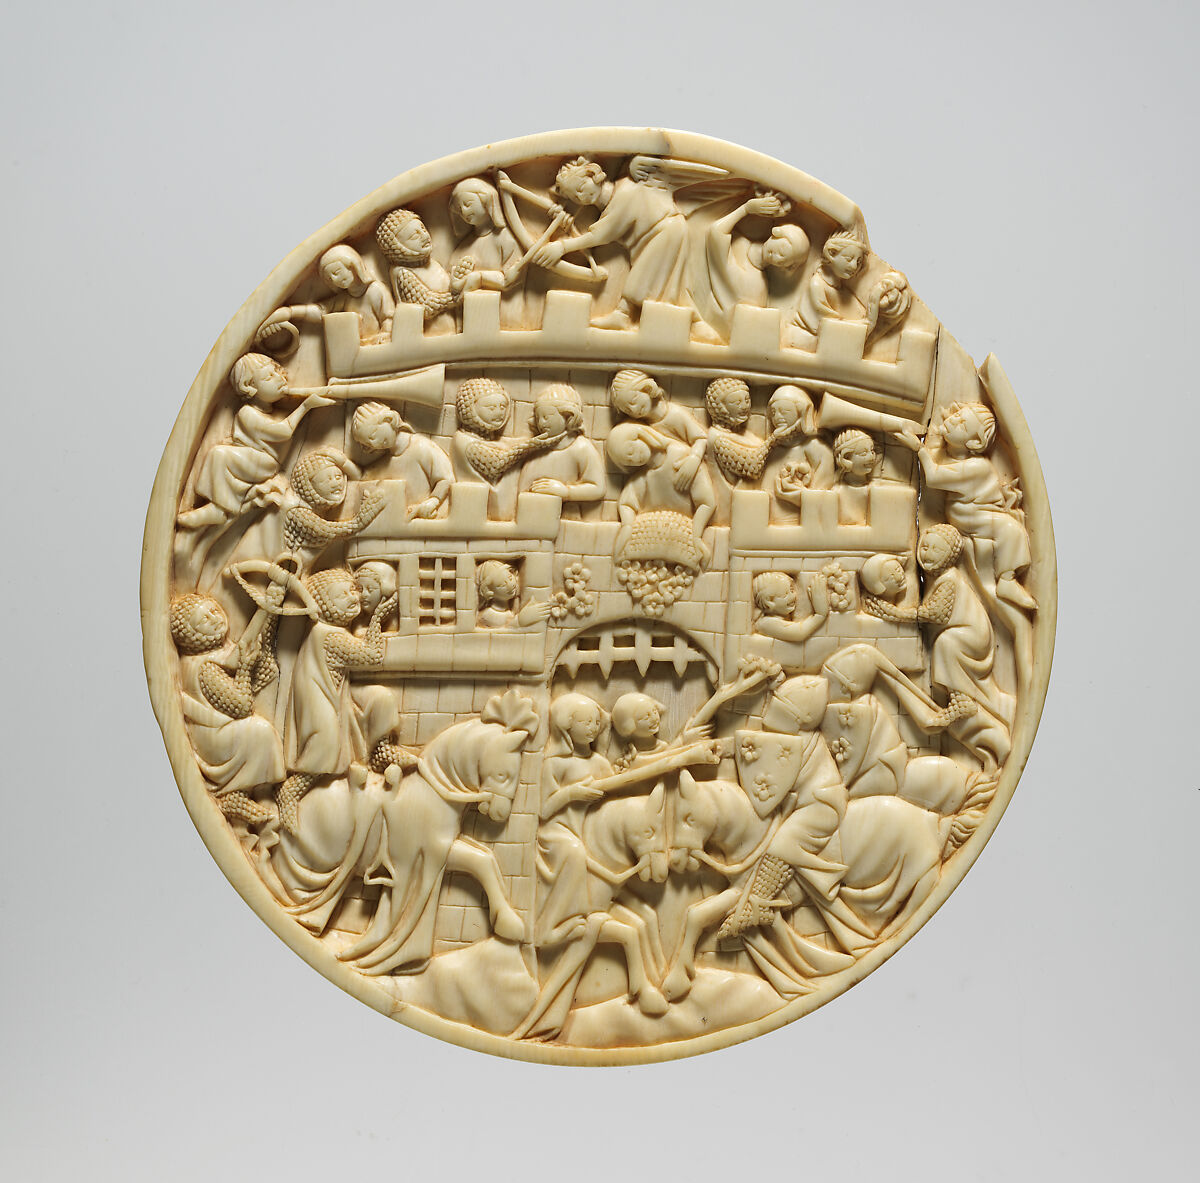 Roundel with Scenes of the Attack on the Castle of Love, Elephant ivory, French 